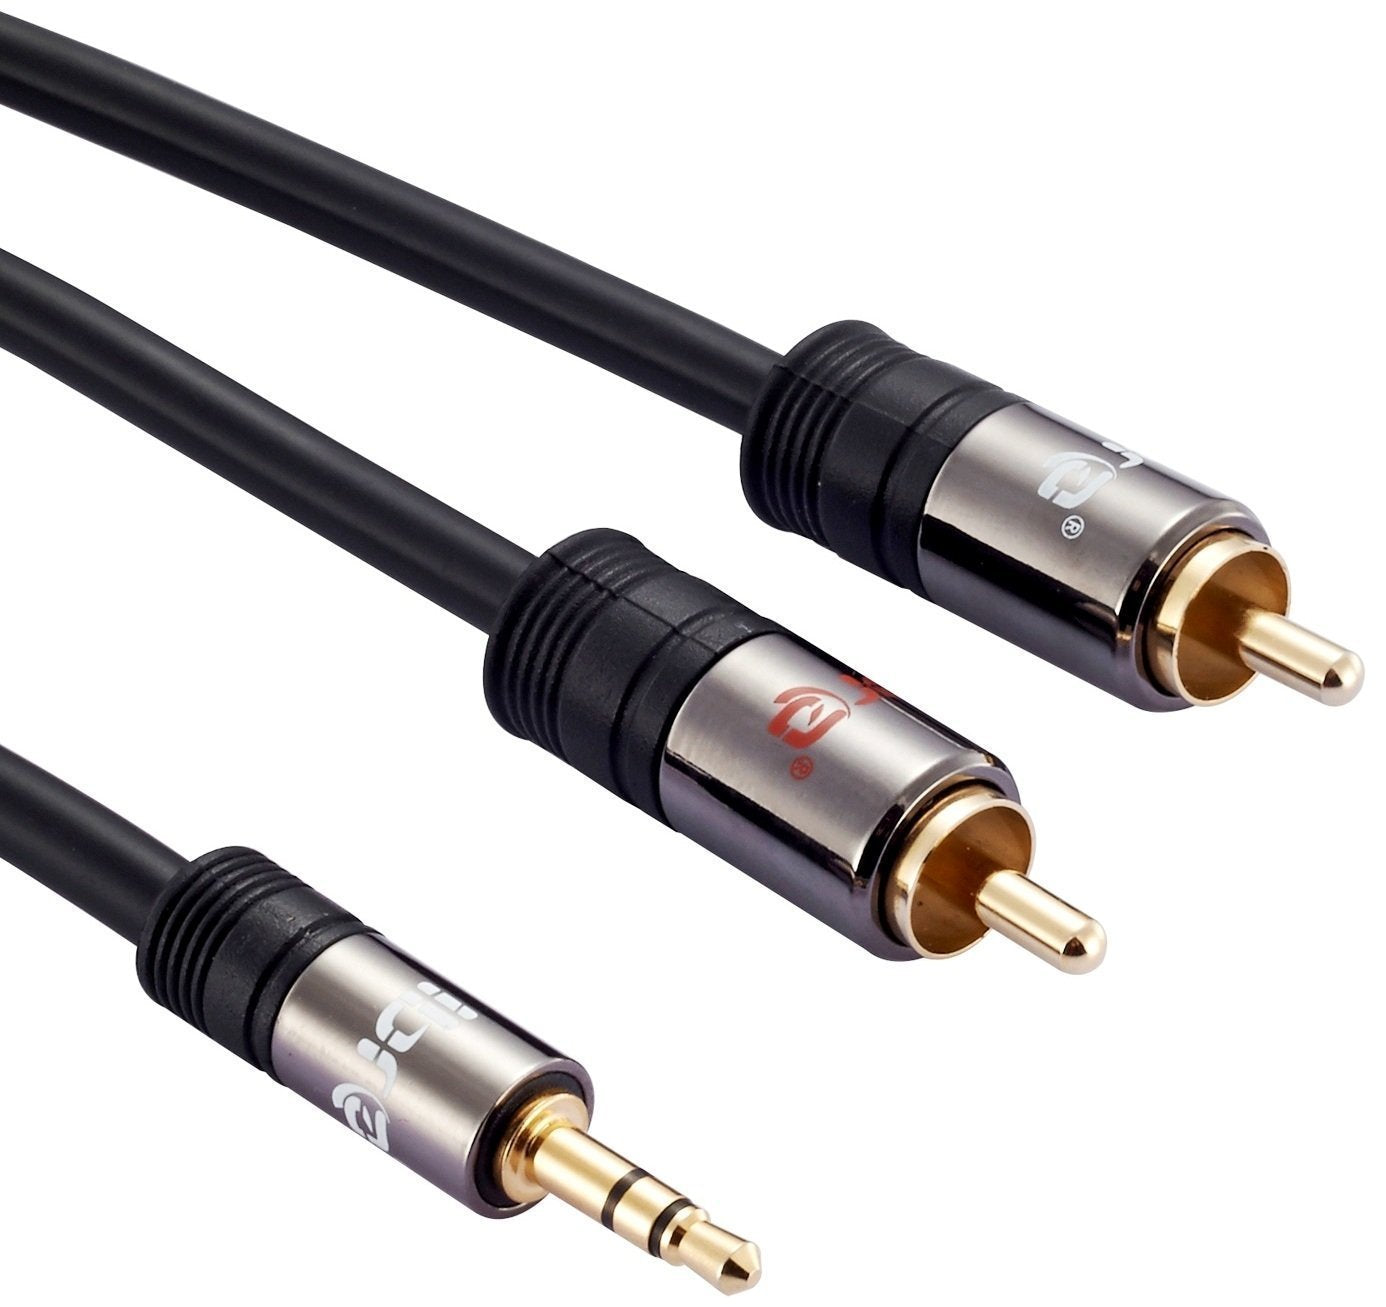 Premium 3.5mm Stereo Jack to 2 RCA Phono Plugs Audio Cable Lead GOLD 1m - IBRA